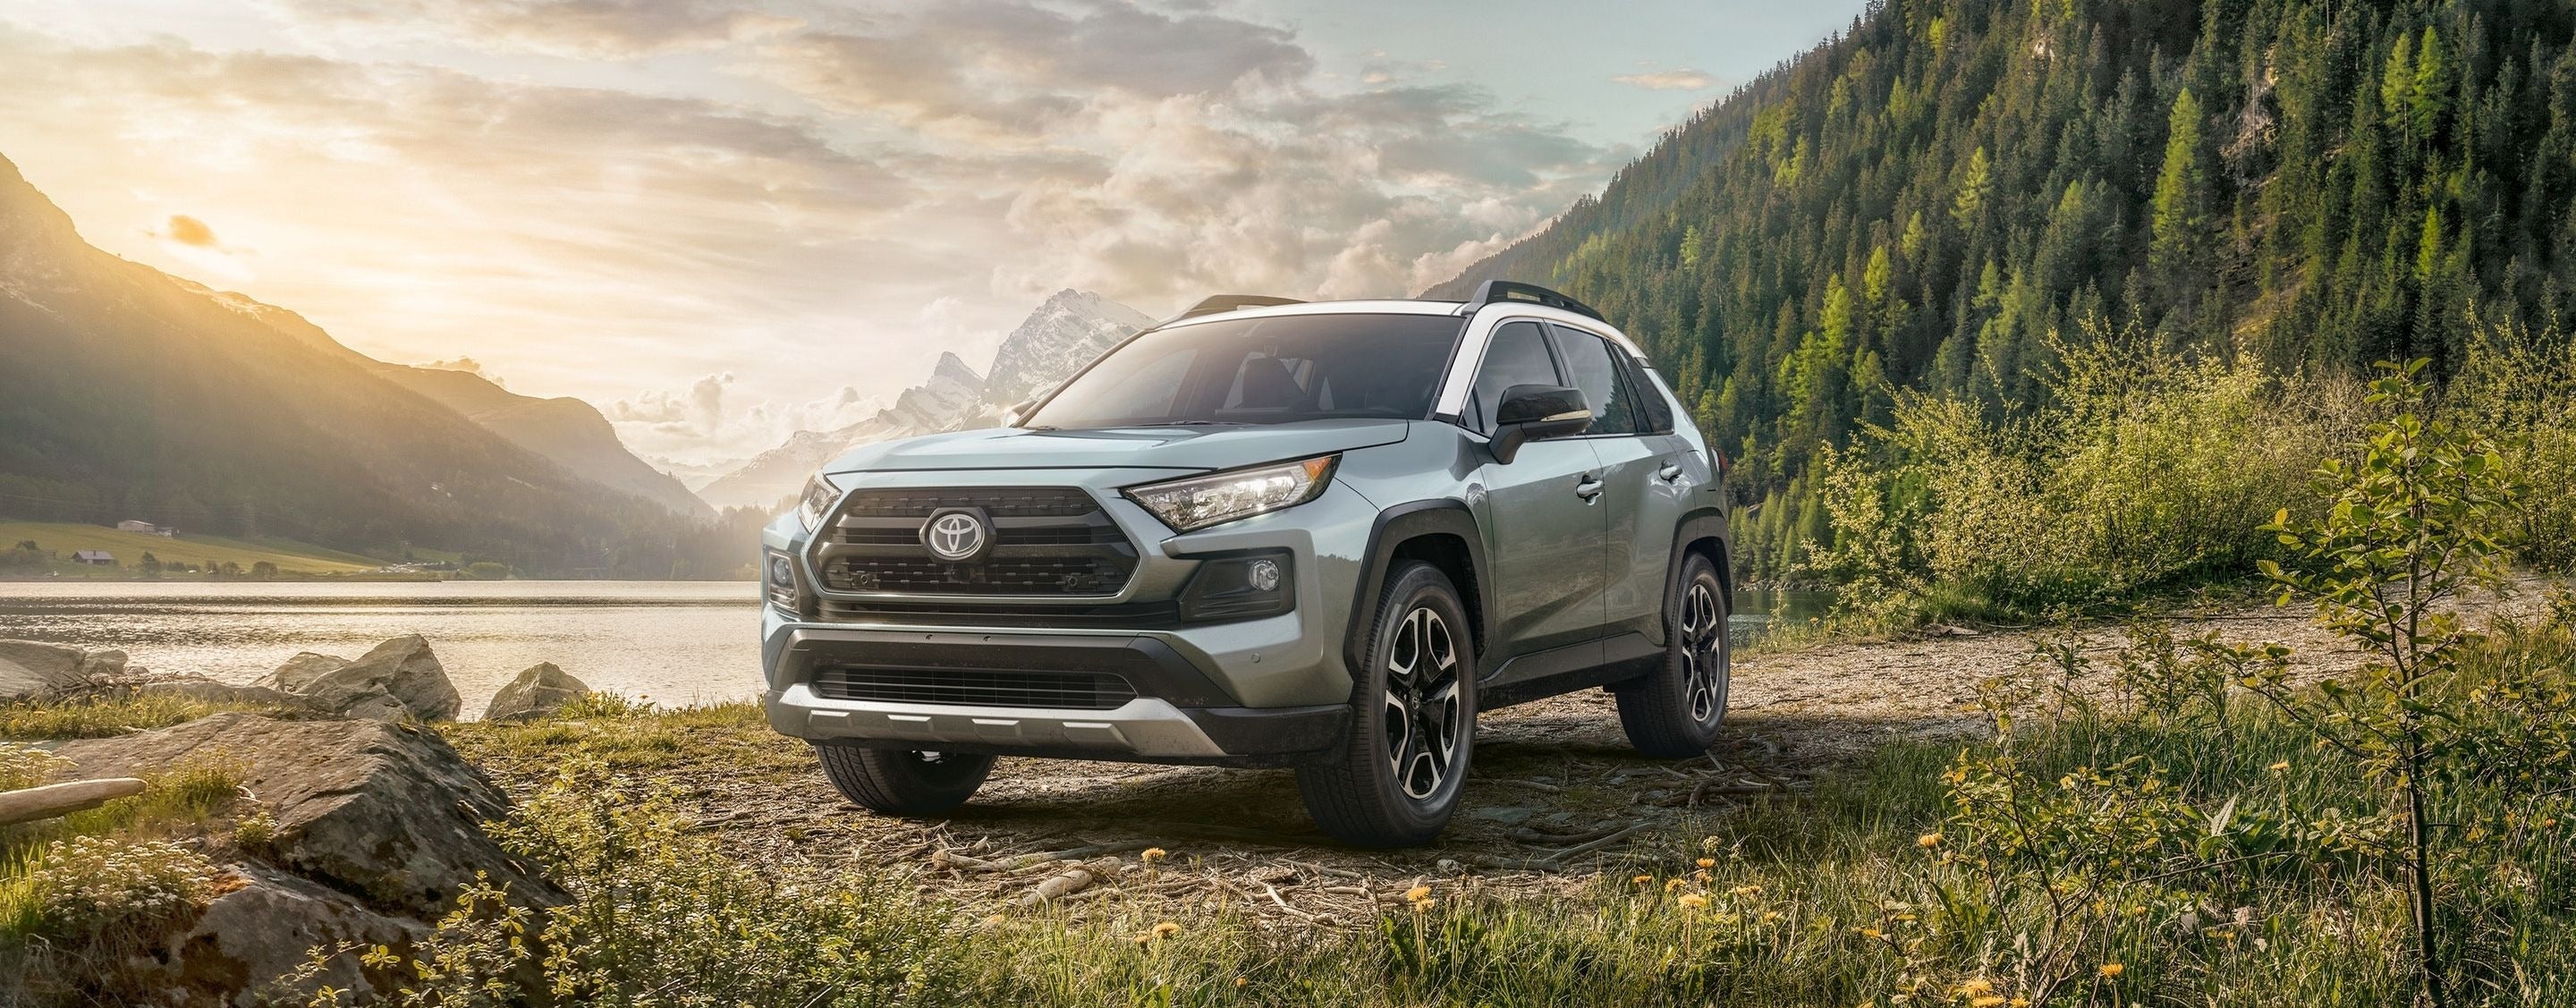 2020 Toyota RAV4 vs 2020 Nissan Rogue Compare the Difference